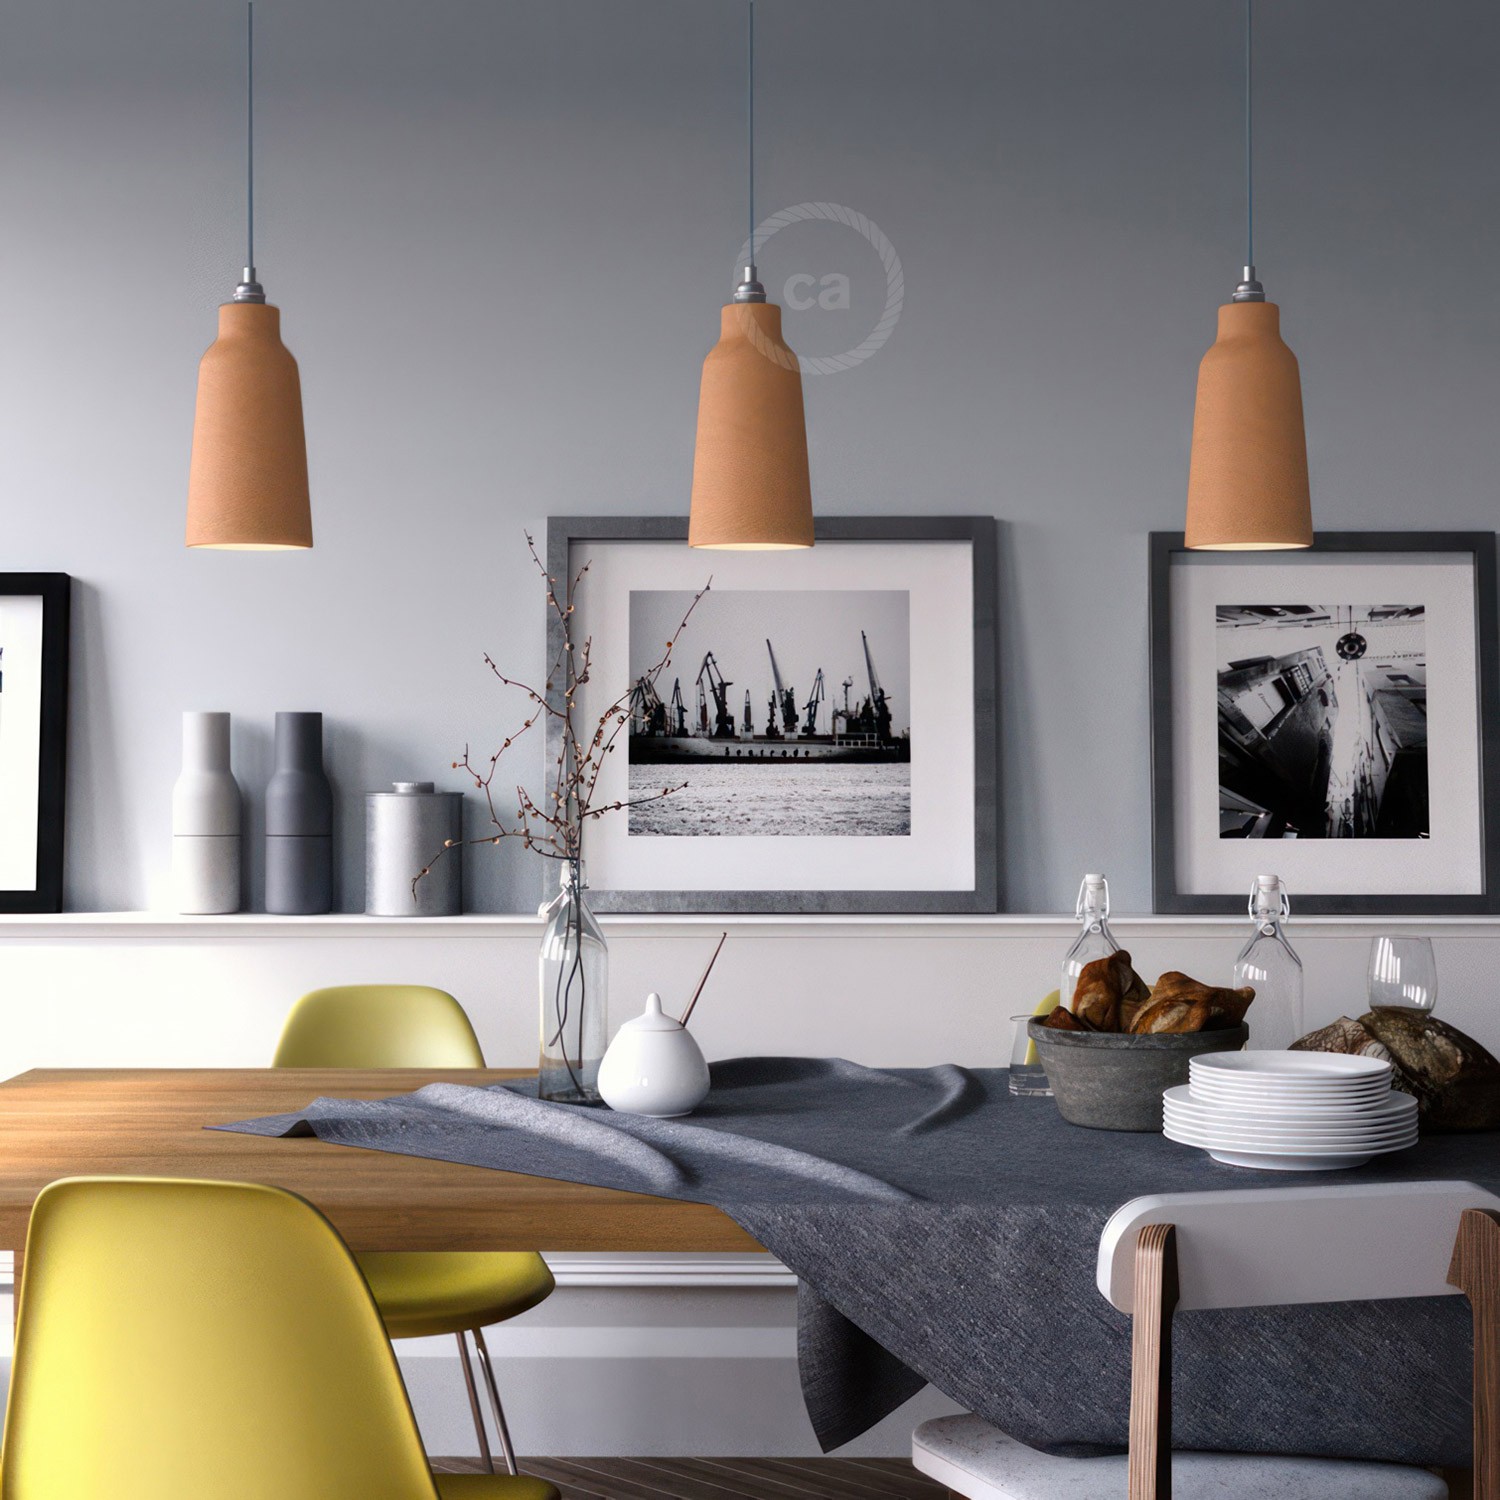 Pendant lamp with textile cable, Bottle ceramic lampshade and metal details - Made in Italy